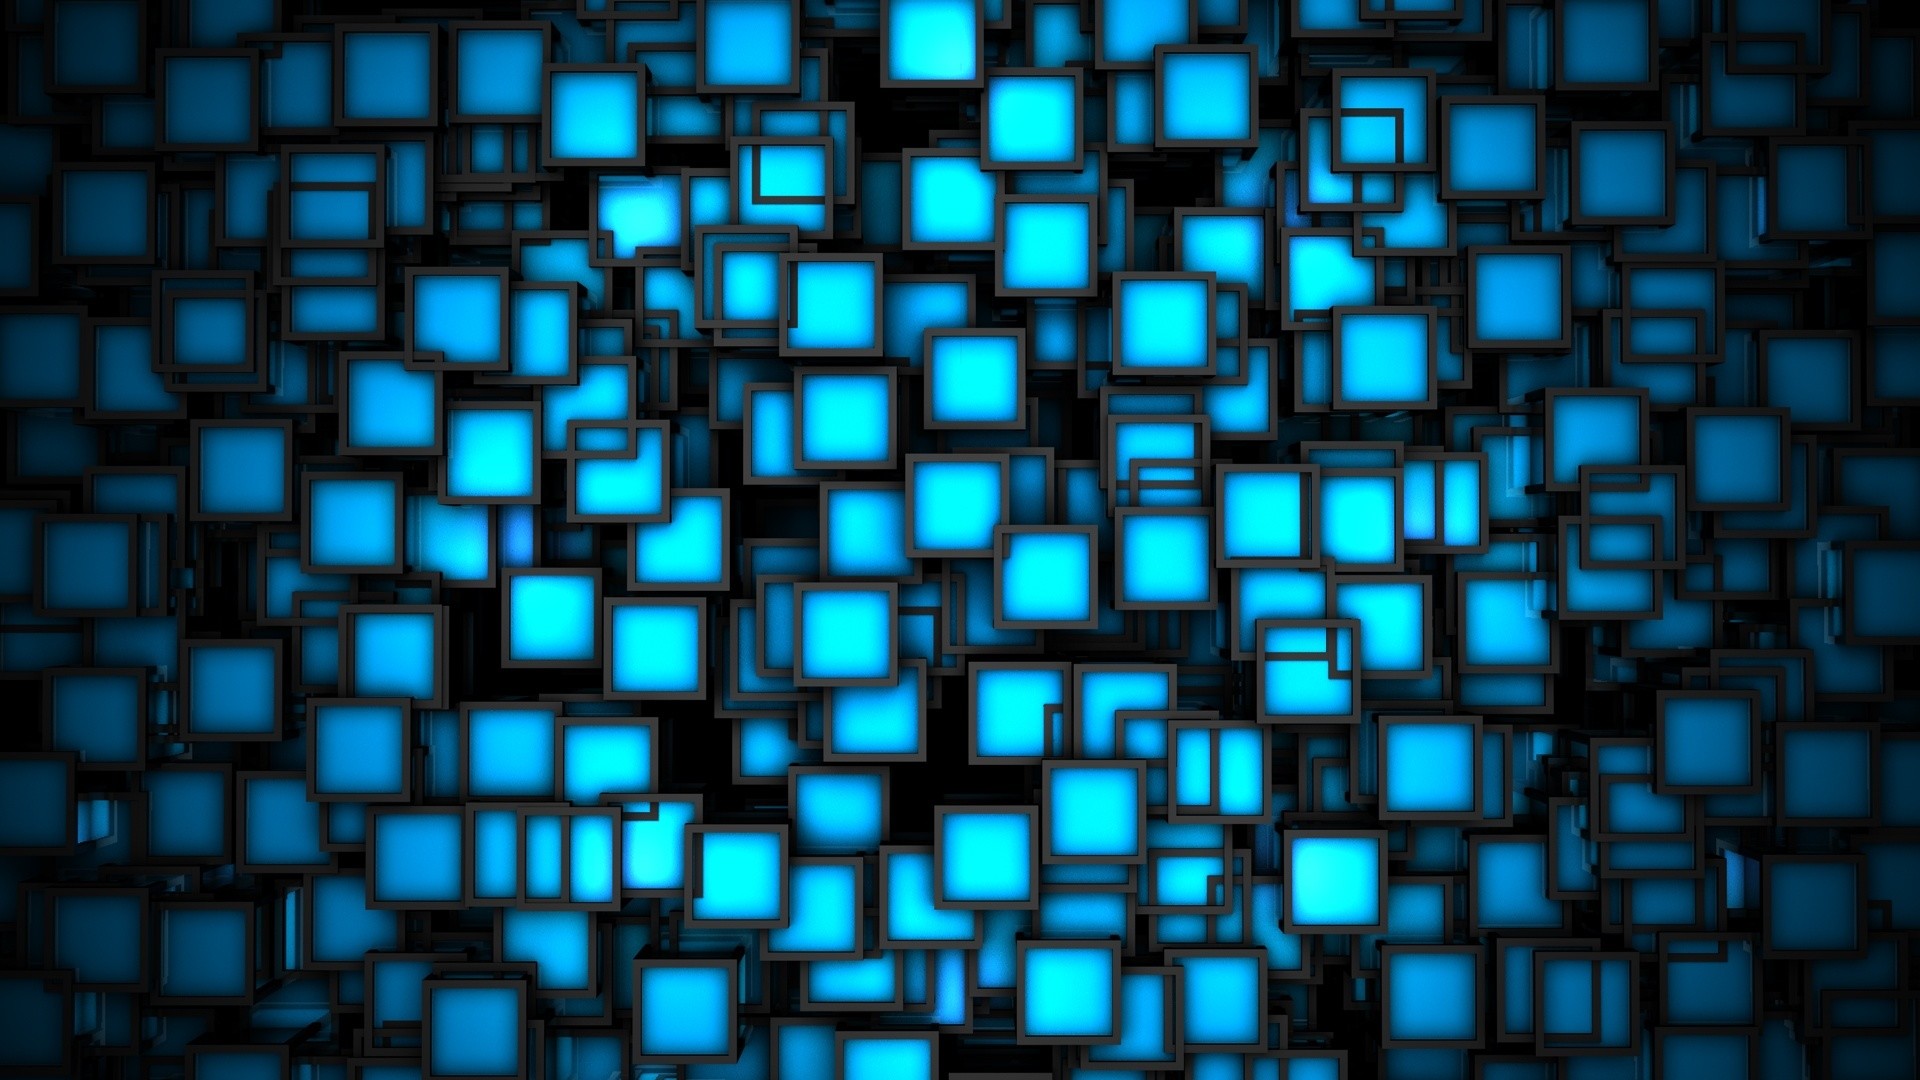 Abstract Wallpaper Millions Of Small Blue Windows